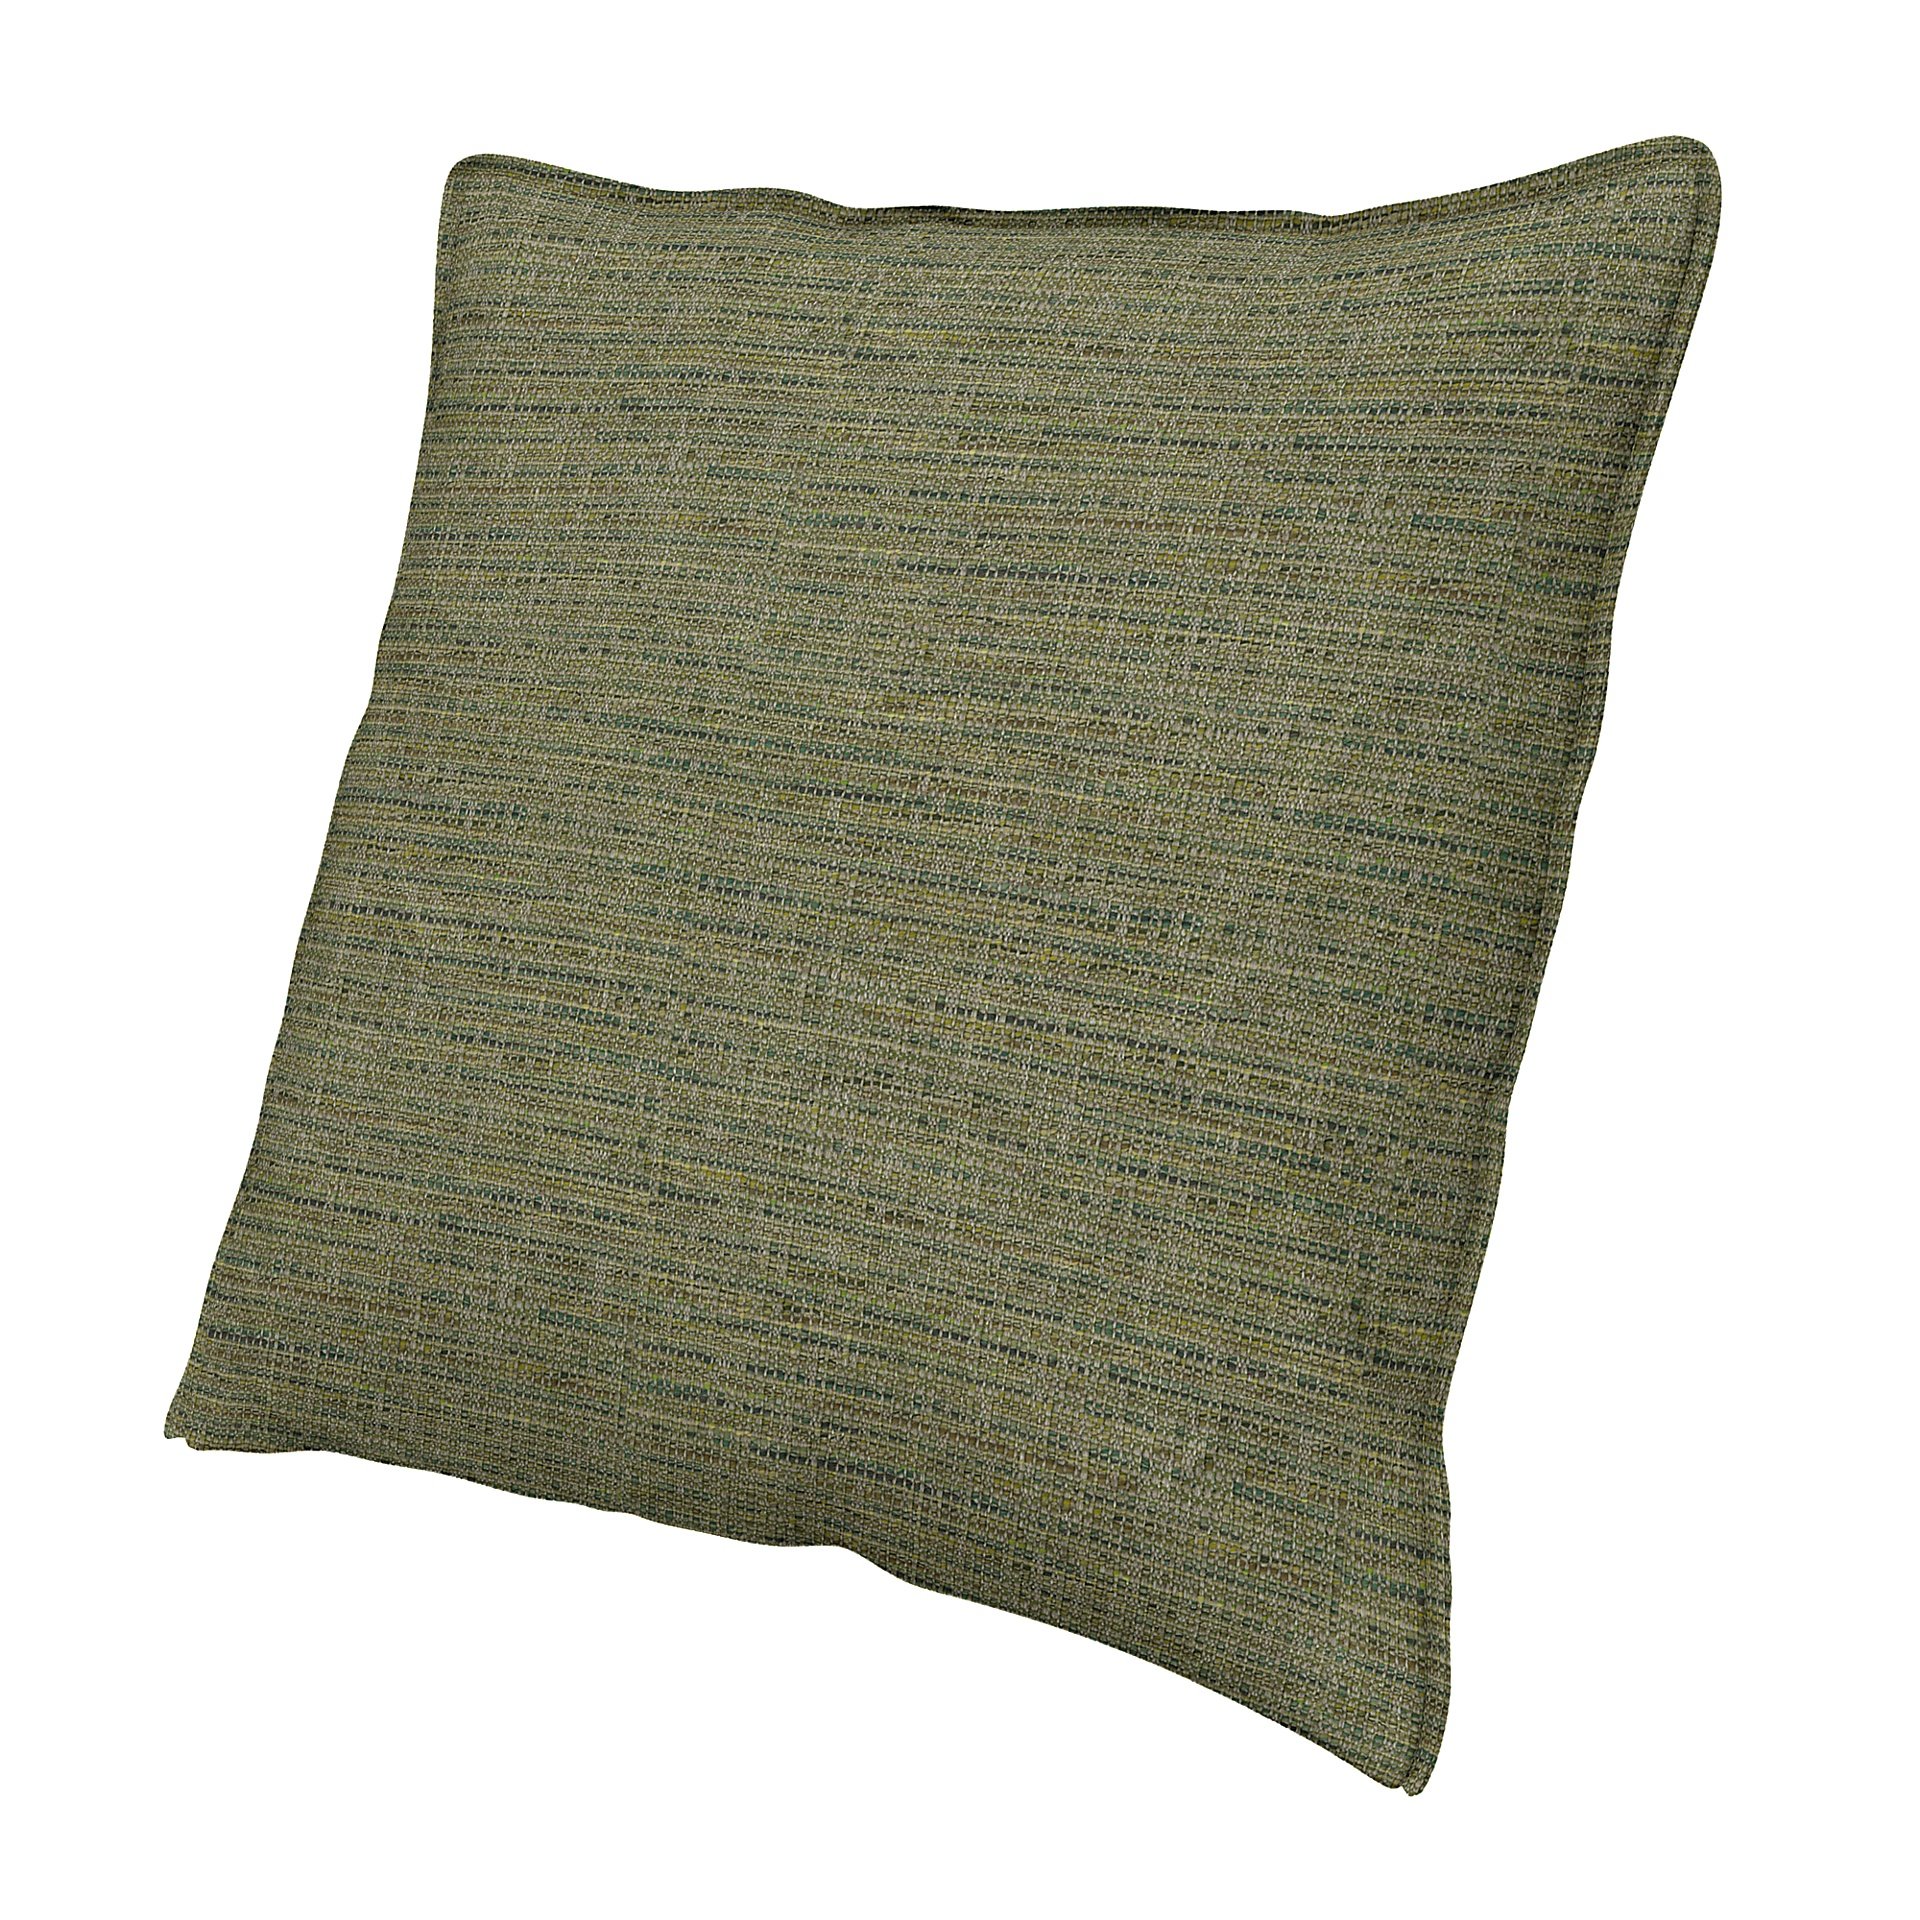 Cushion cover, Meadow Green, Boucle & Texture - Bemz